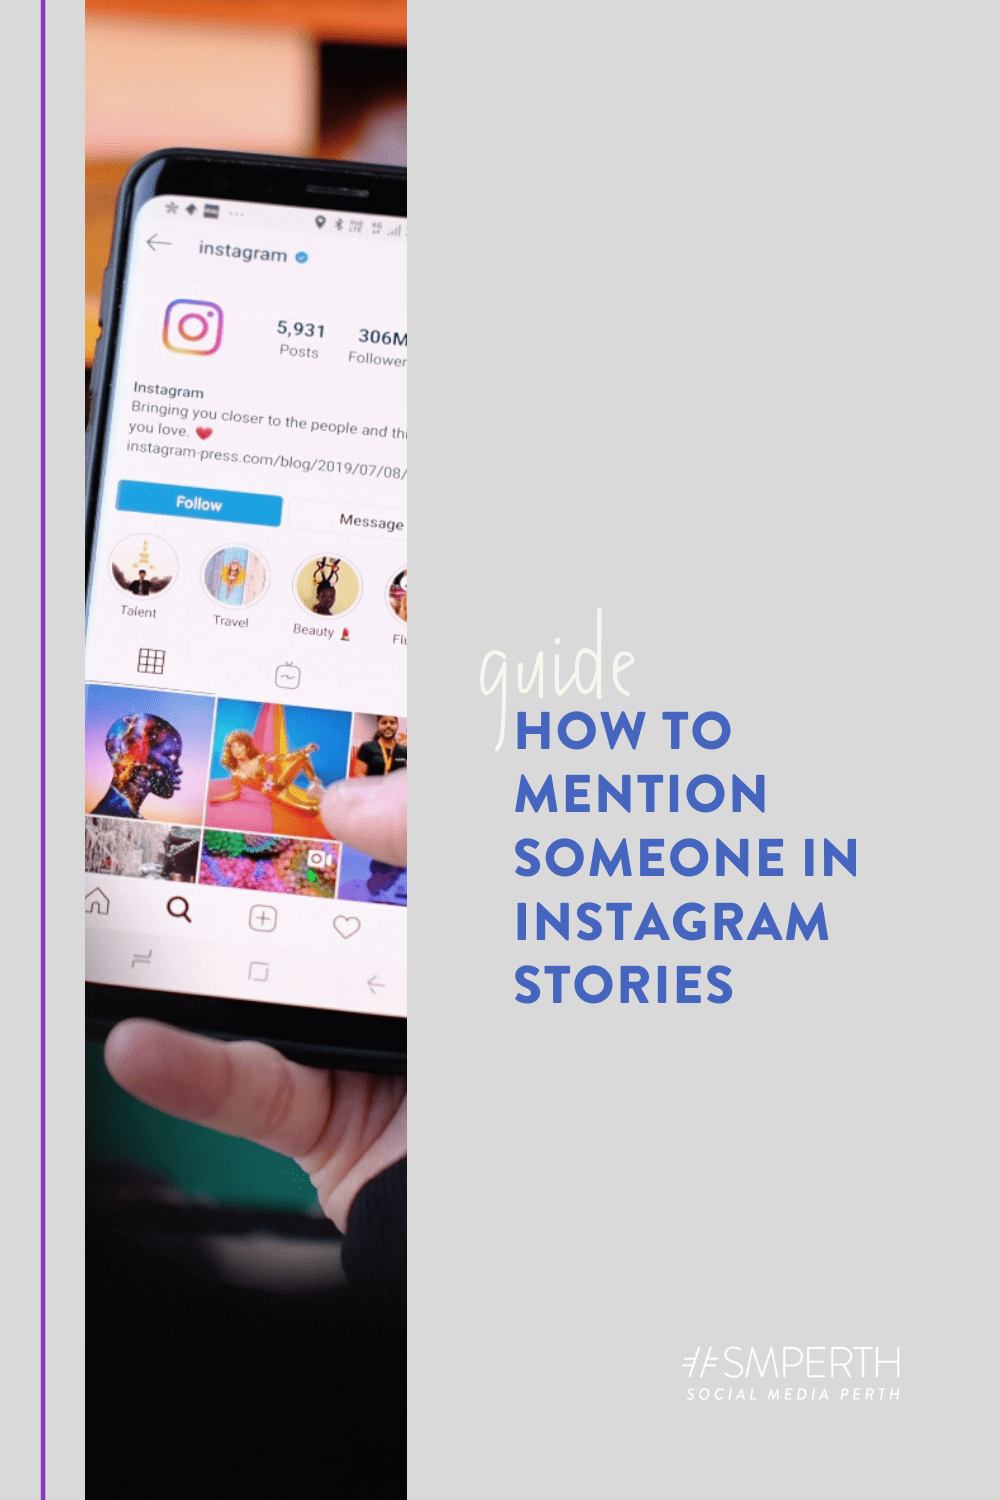 How to Mention Someone in Instagram Stories